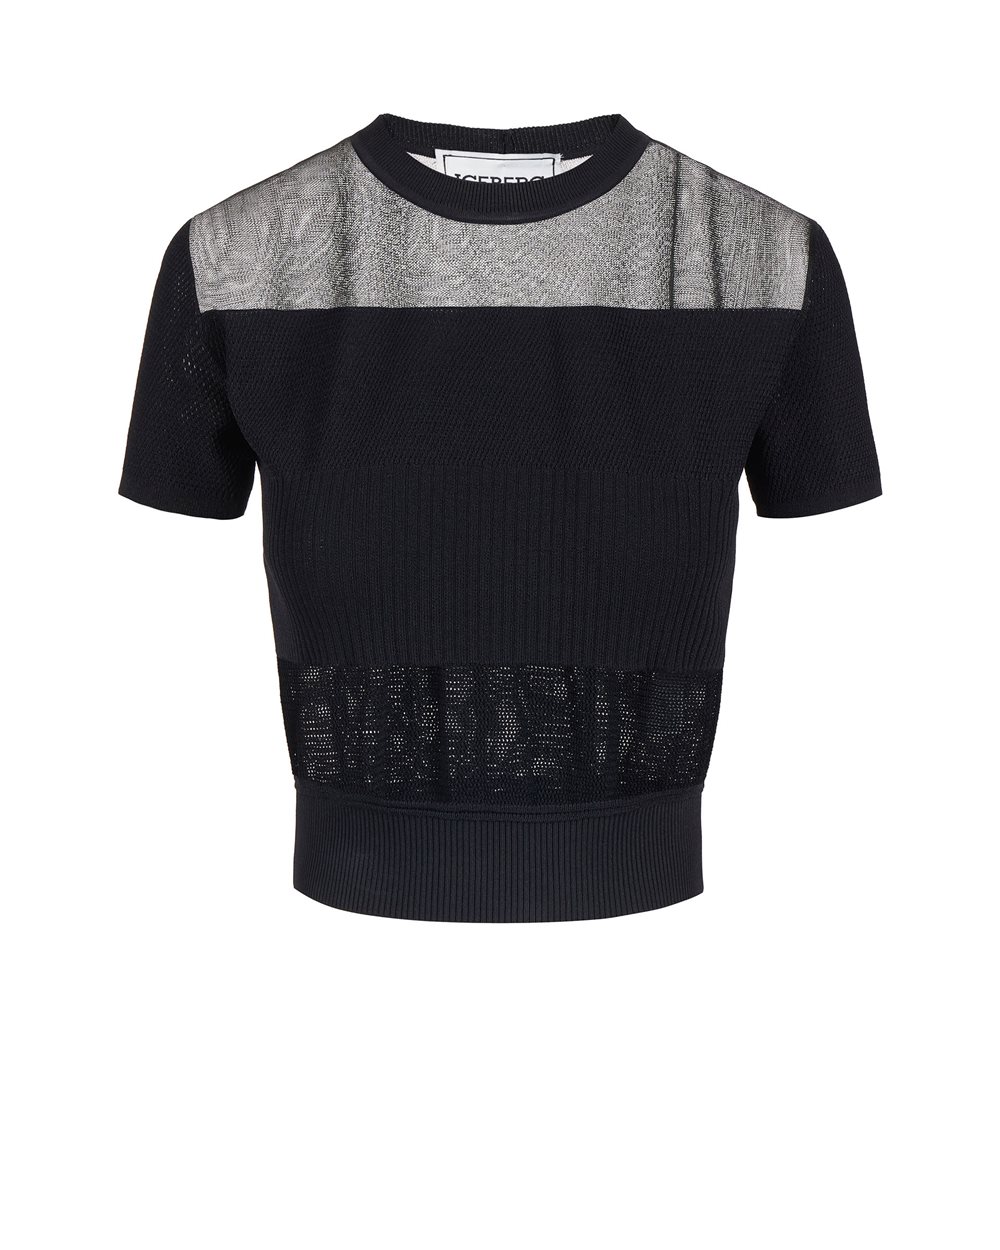 Black top with logo - Knitwear | Iceberg - Official Website